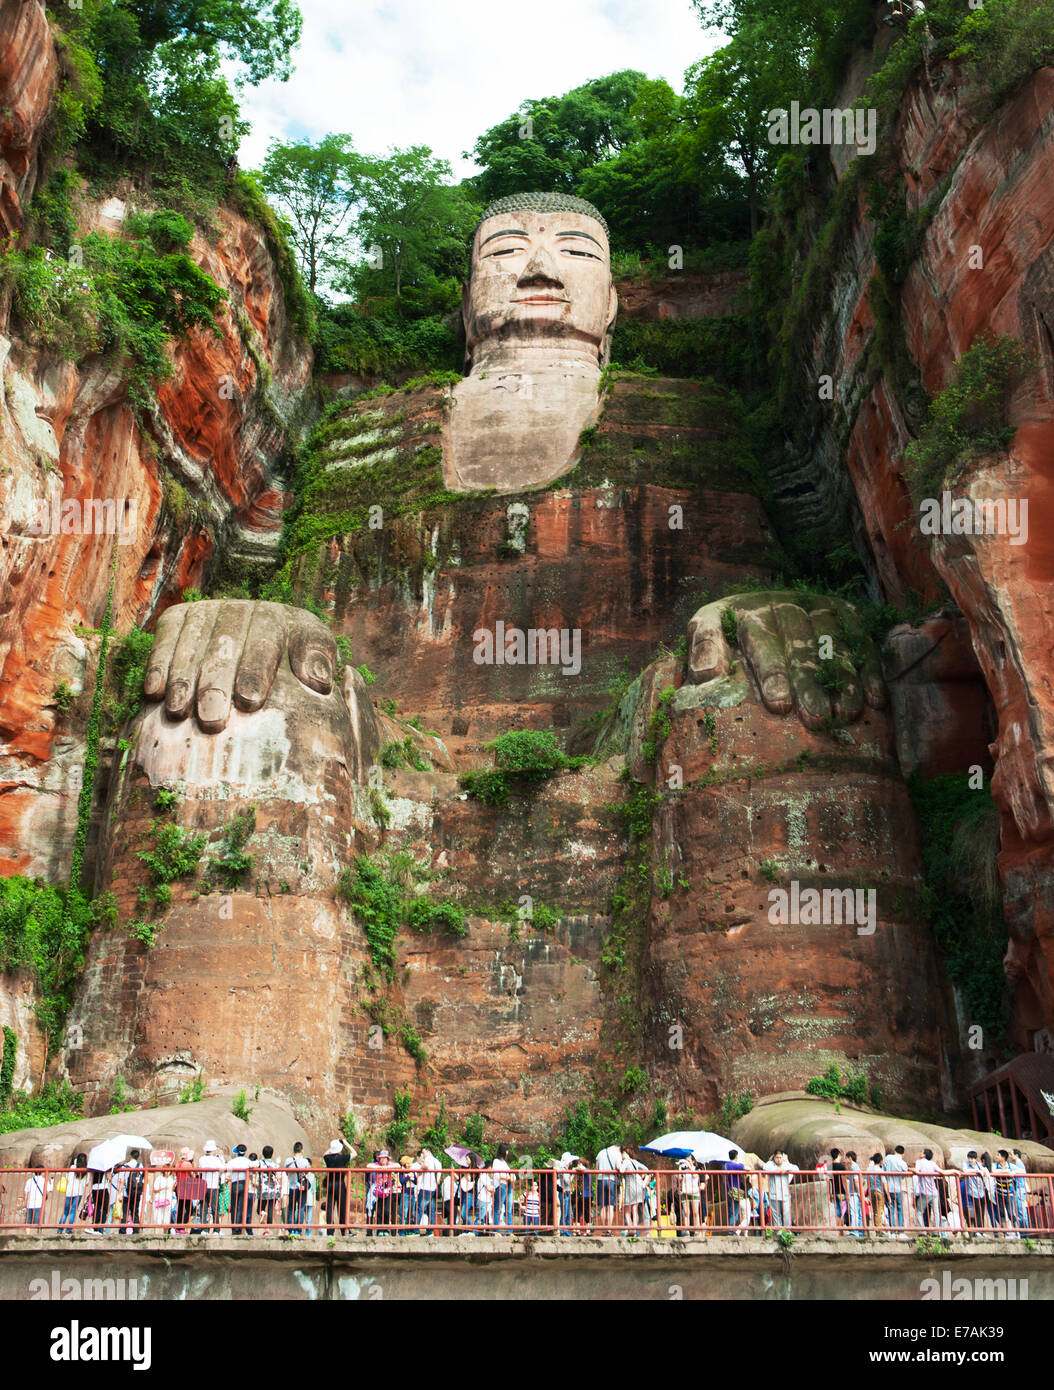 Giant Buddha, Min River, from tour boat, Leshan, China Stock Photo